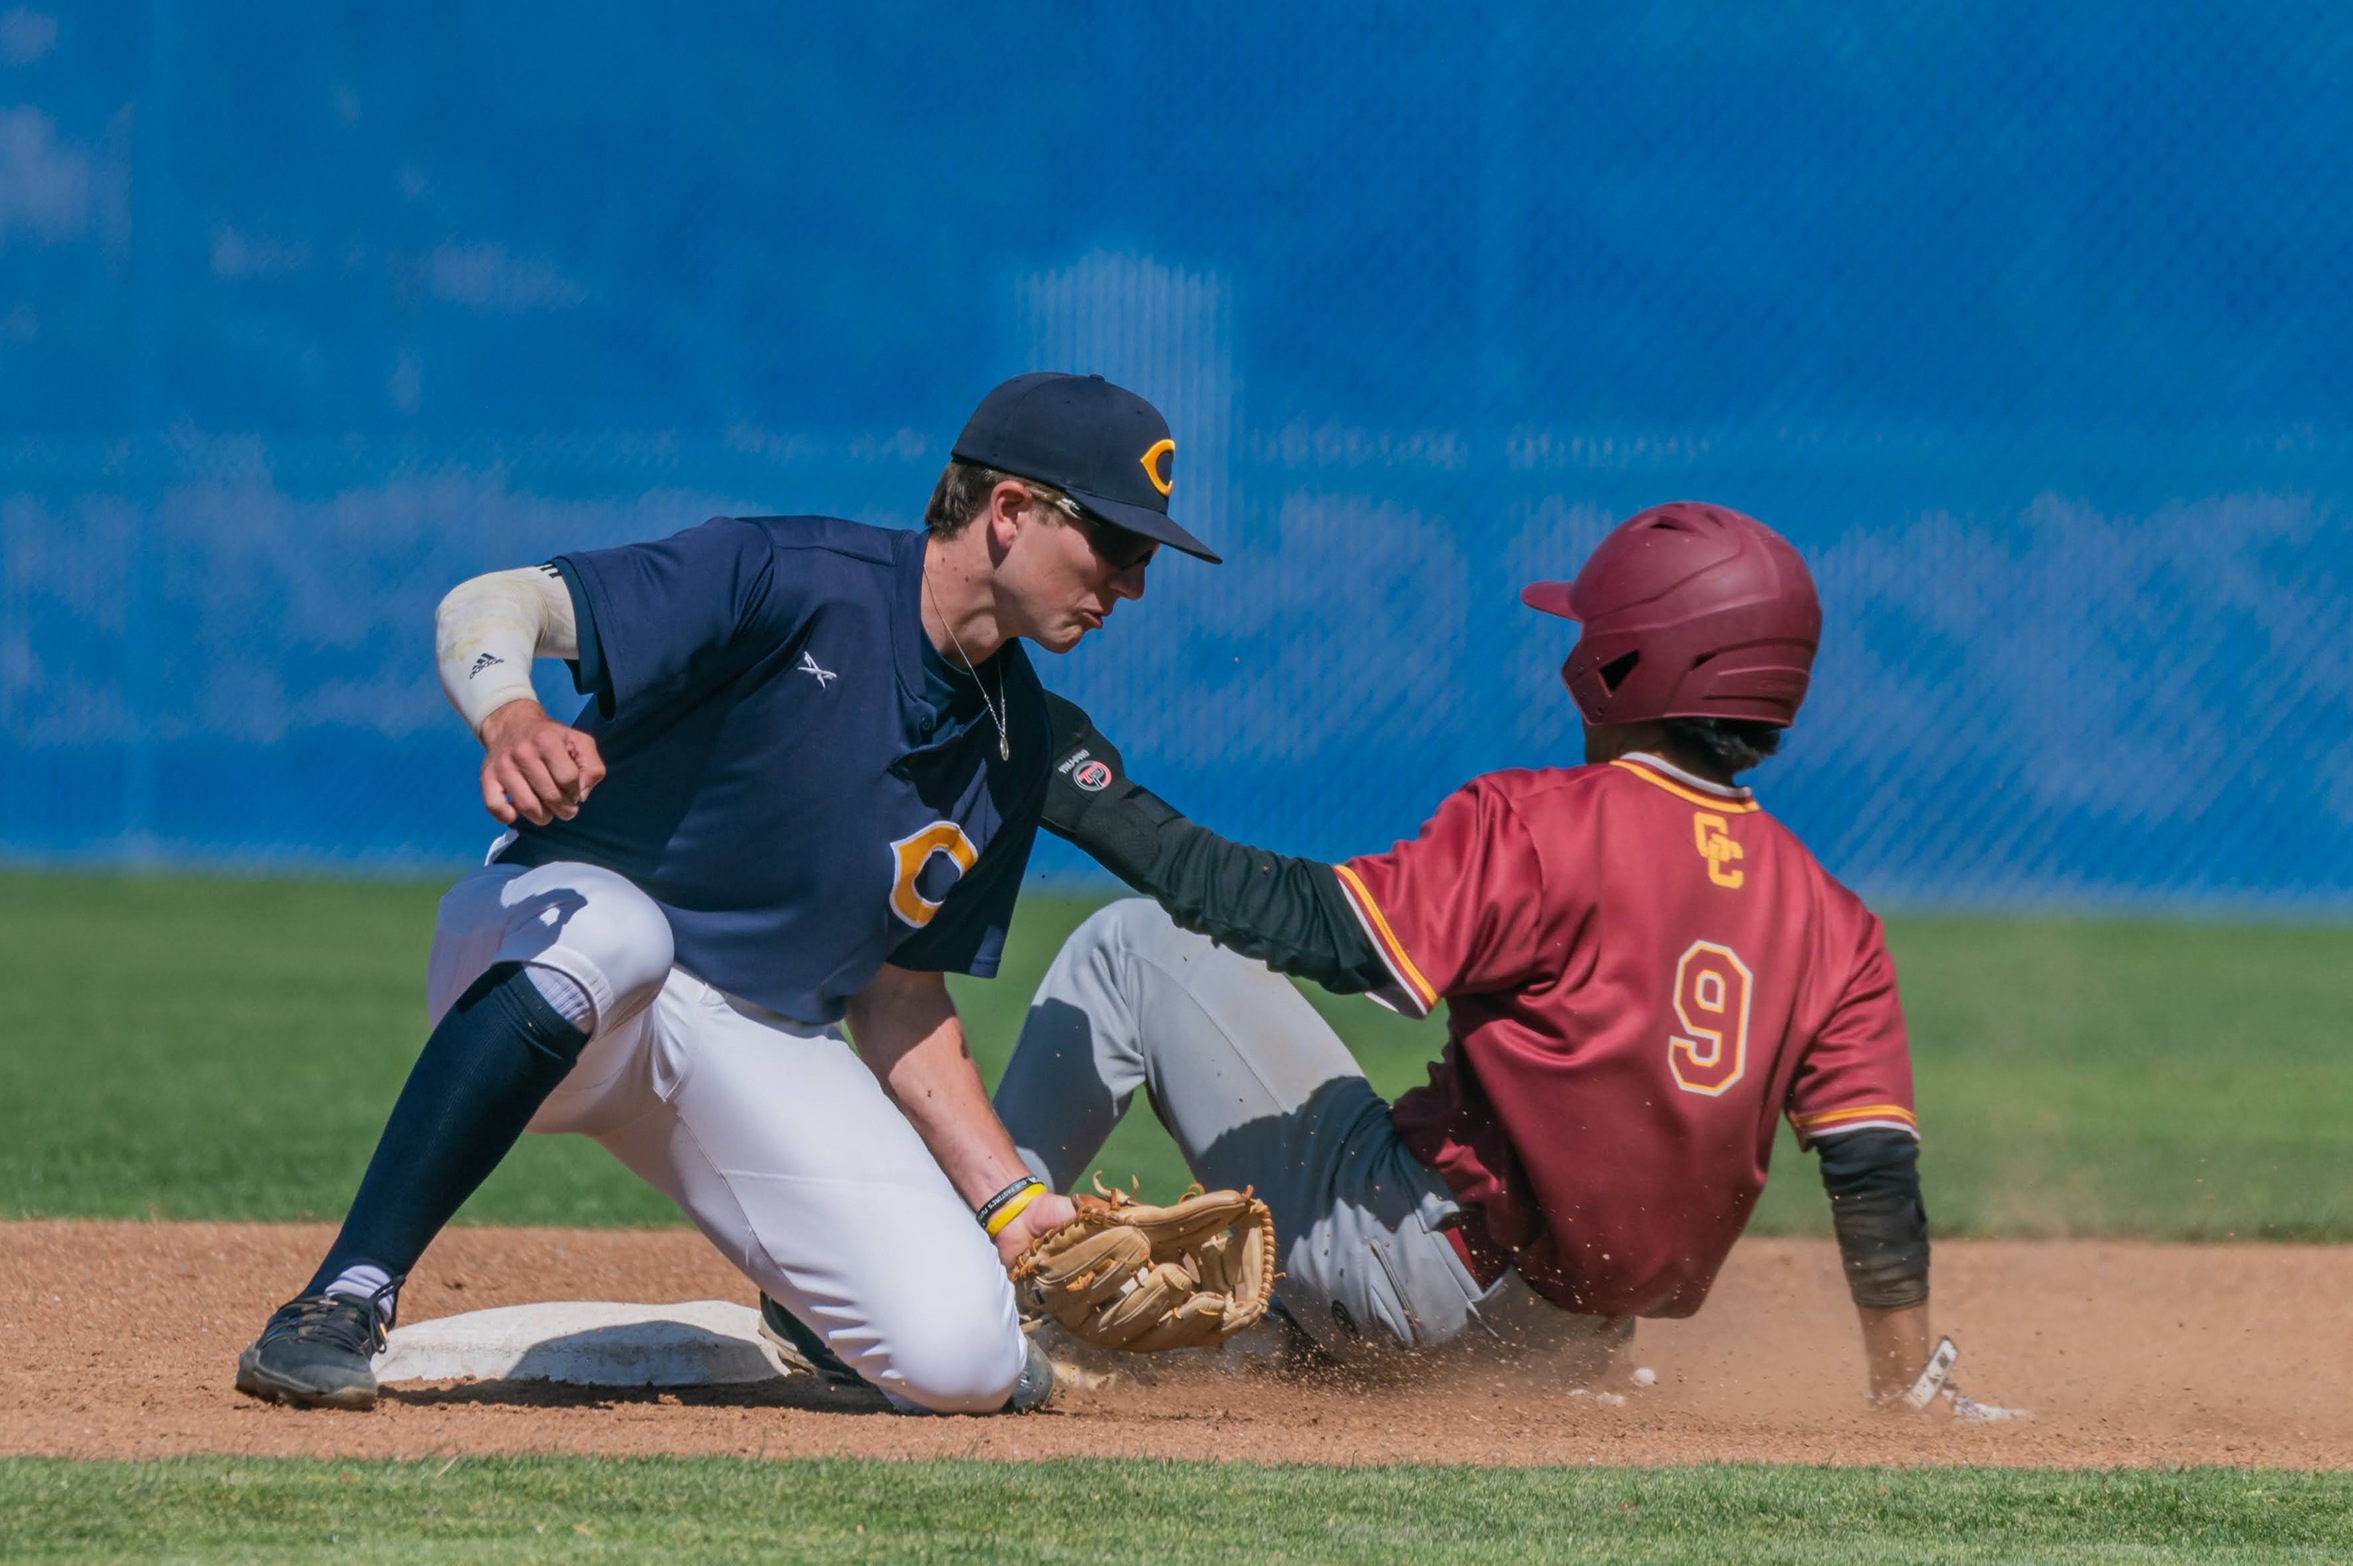 College of the Canyons baseball vs. Glendale on April 5, 2022.